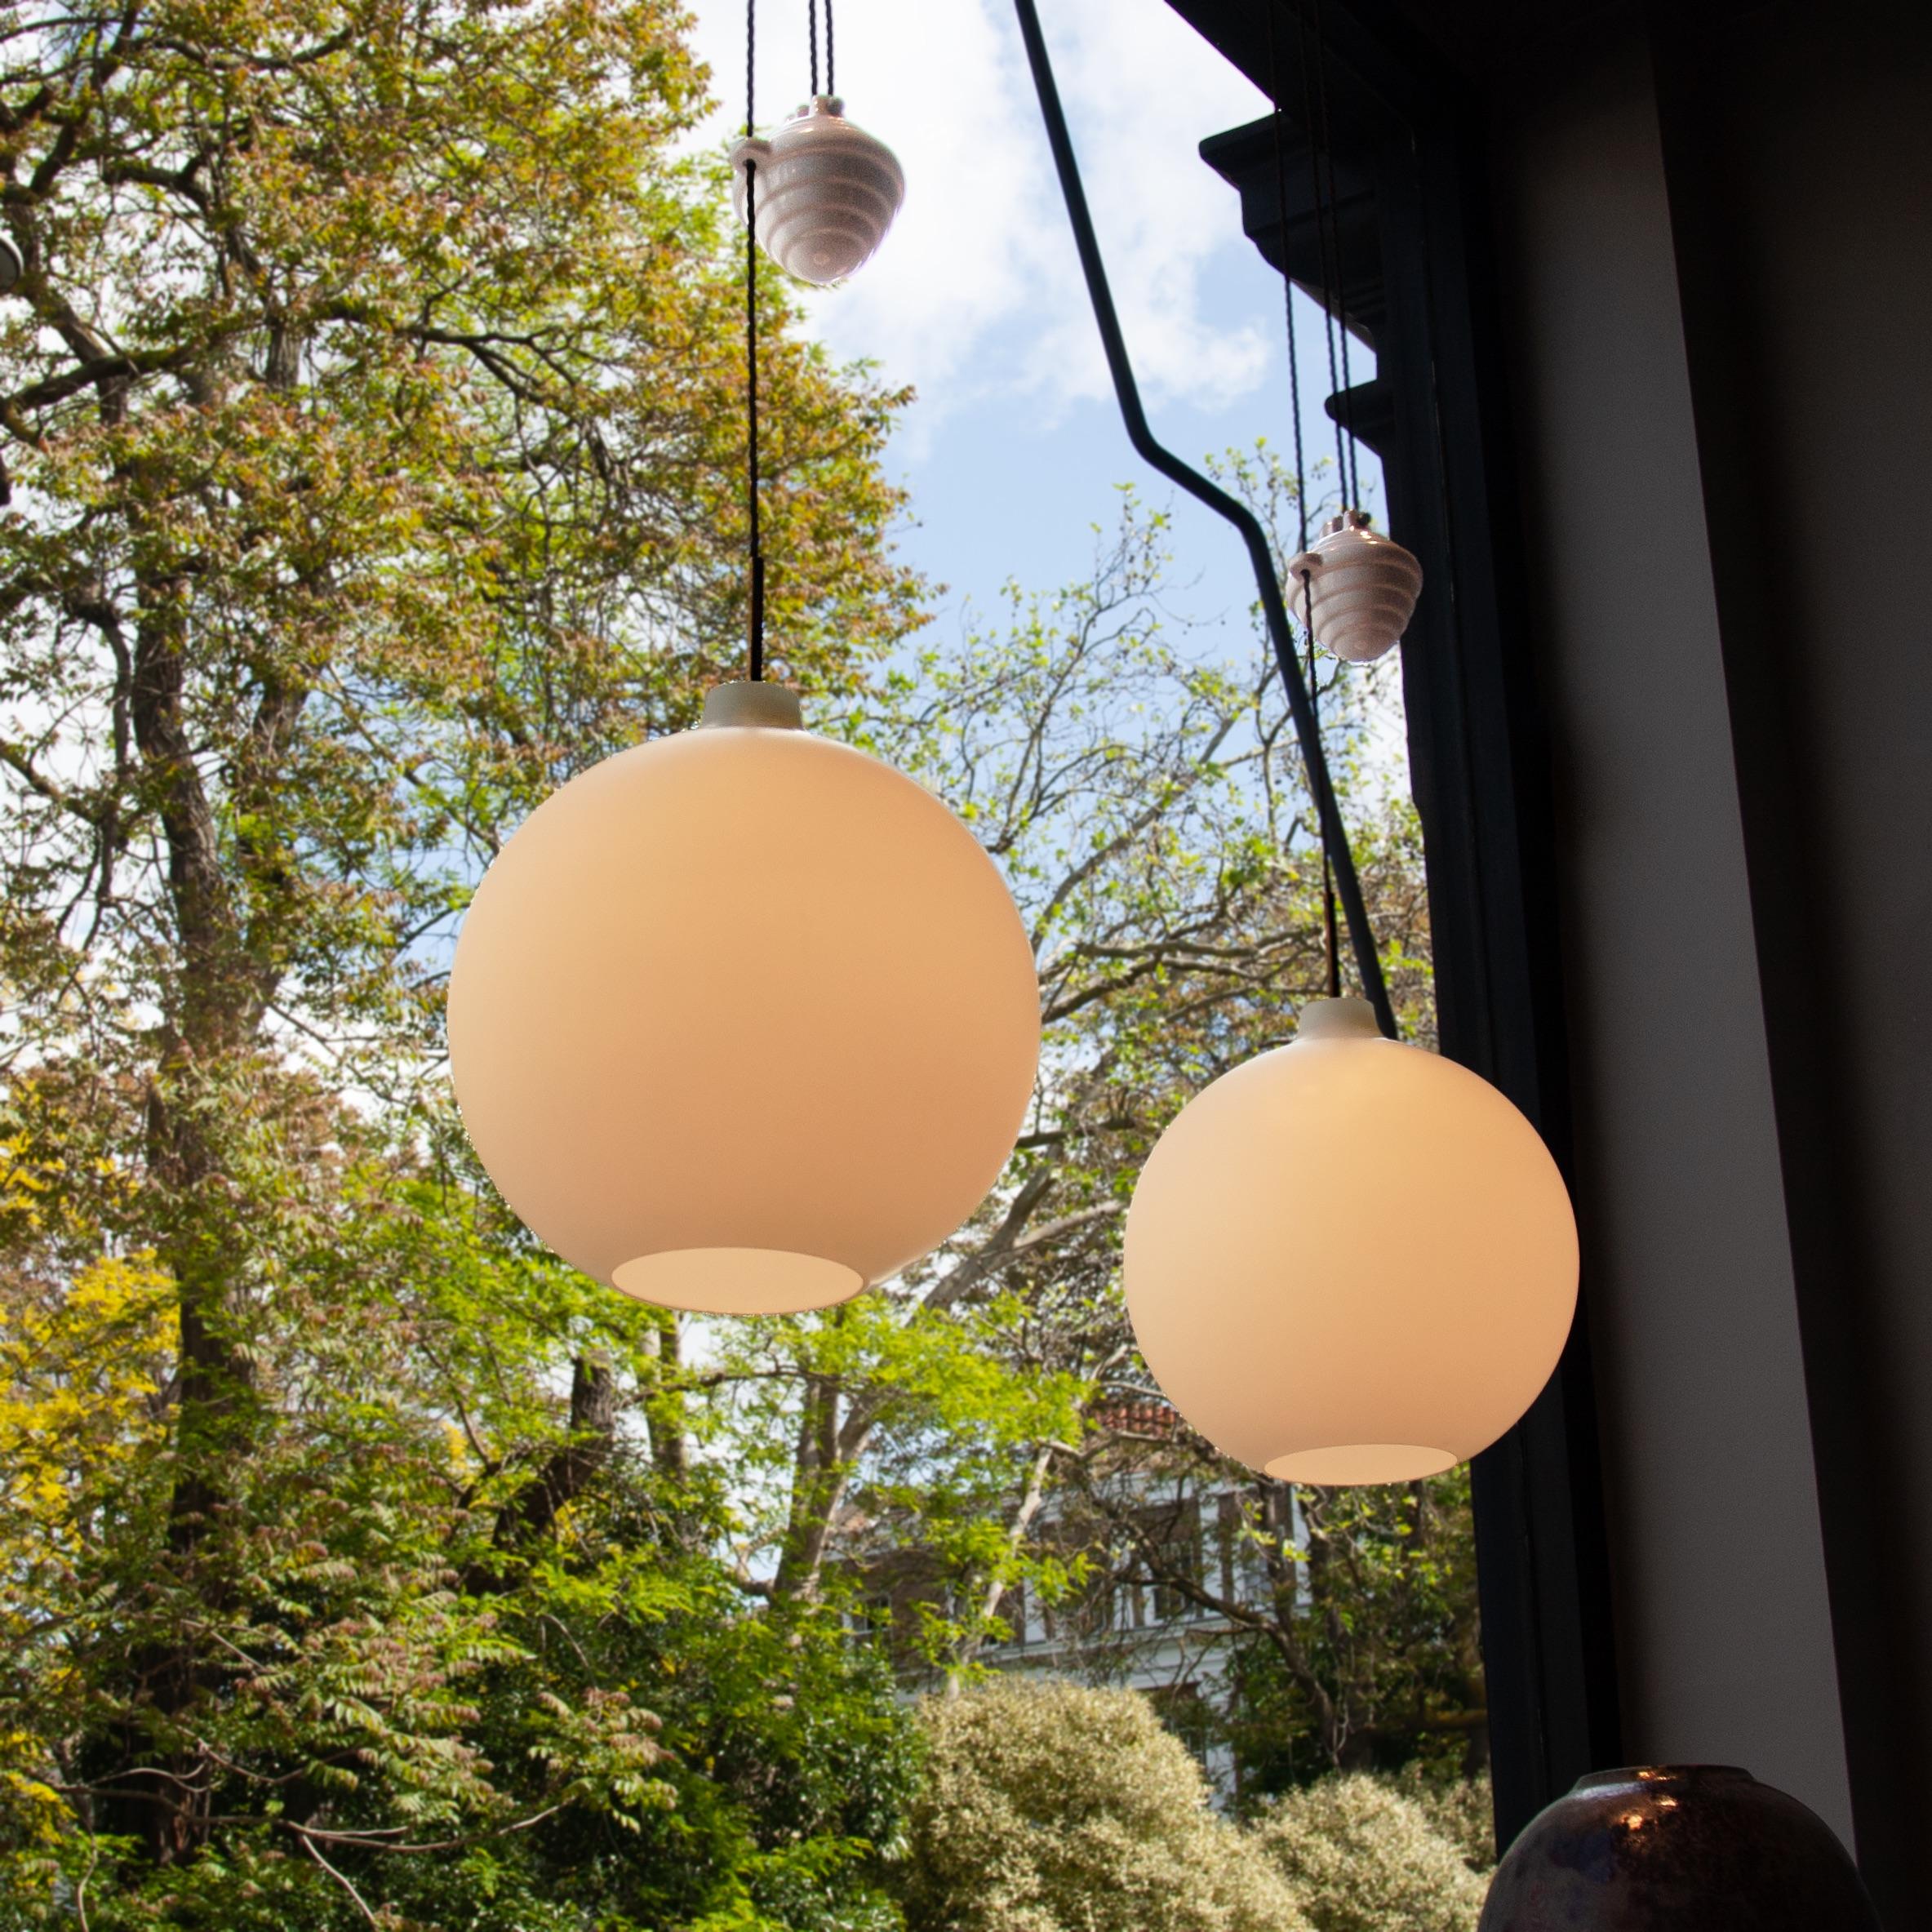 A vintage example of Wilhelm Wohlert's Satellit Pendel, with a ceramic rise & fall mechanism.

Designed in 1949 in collaboration with Louis Poulson, the lampshade is made from a thick, opaque, white glass, which softly diffuses light evenly